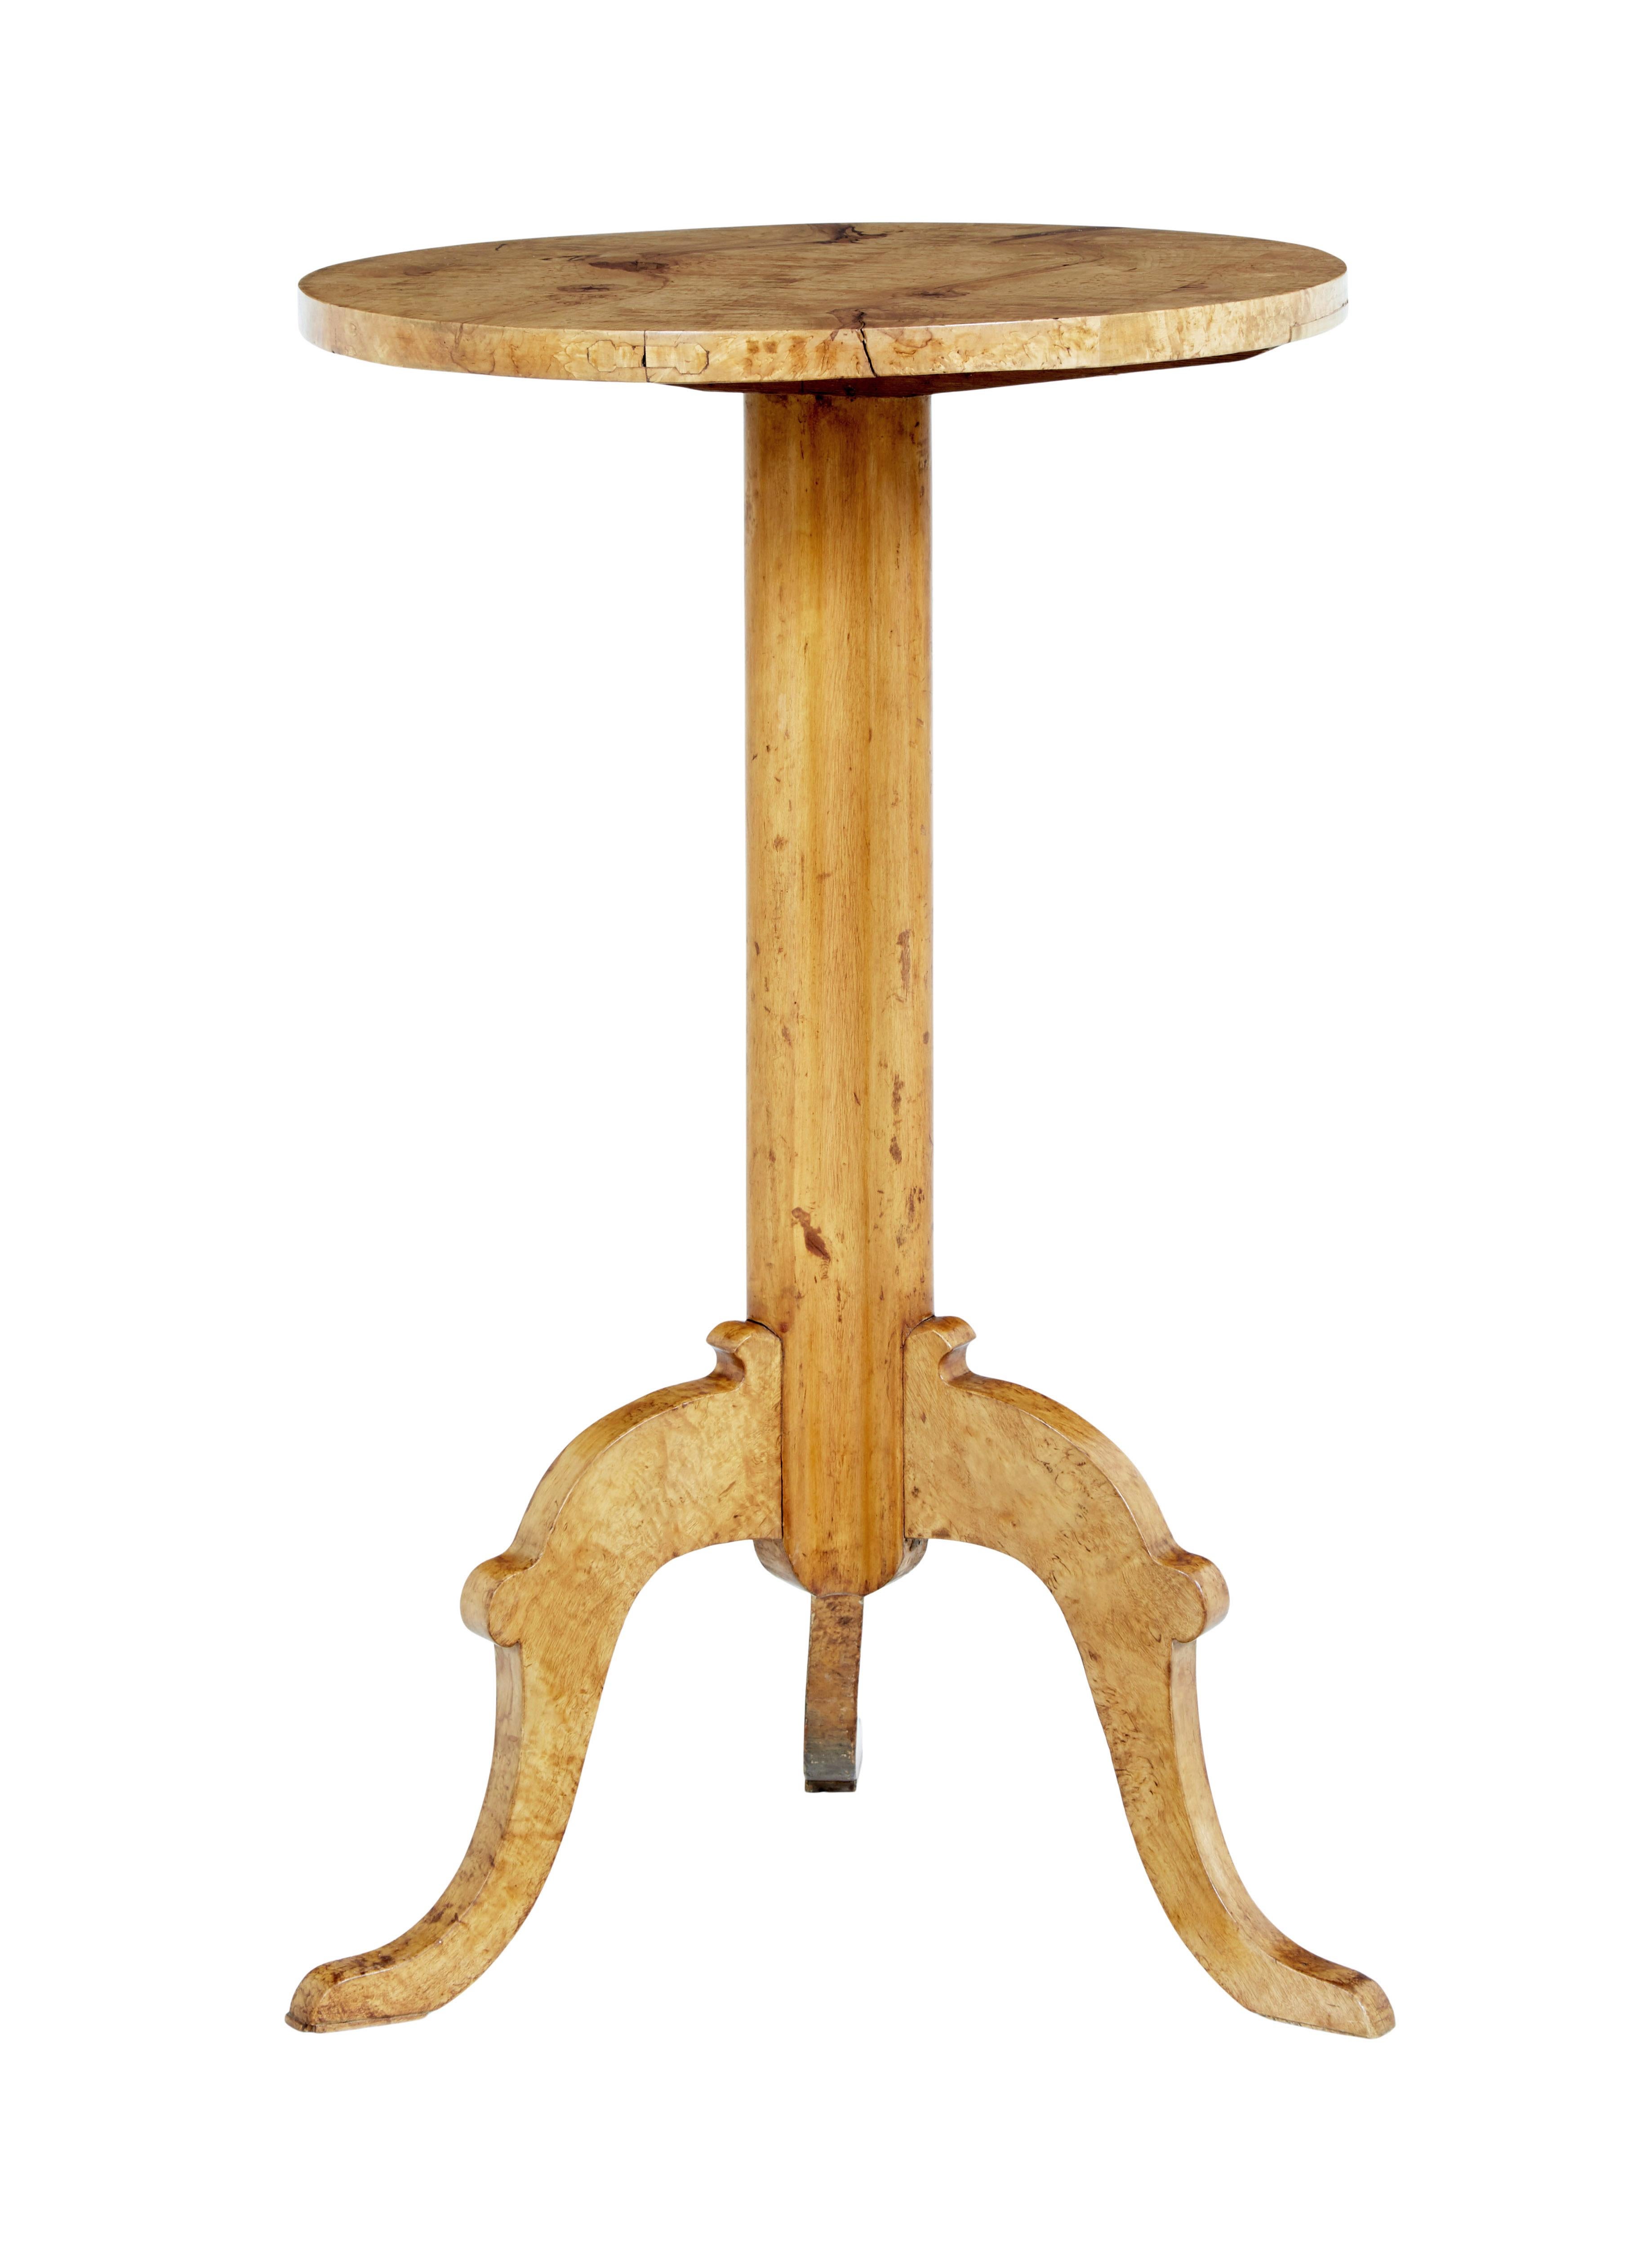 Hand-Crafted Mid-19th Century Birch Root Occasional Table For Sale